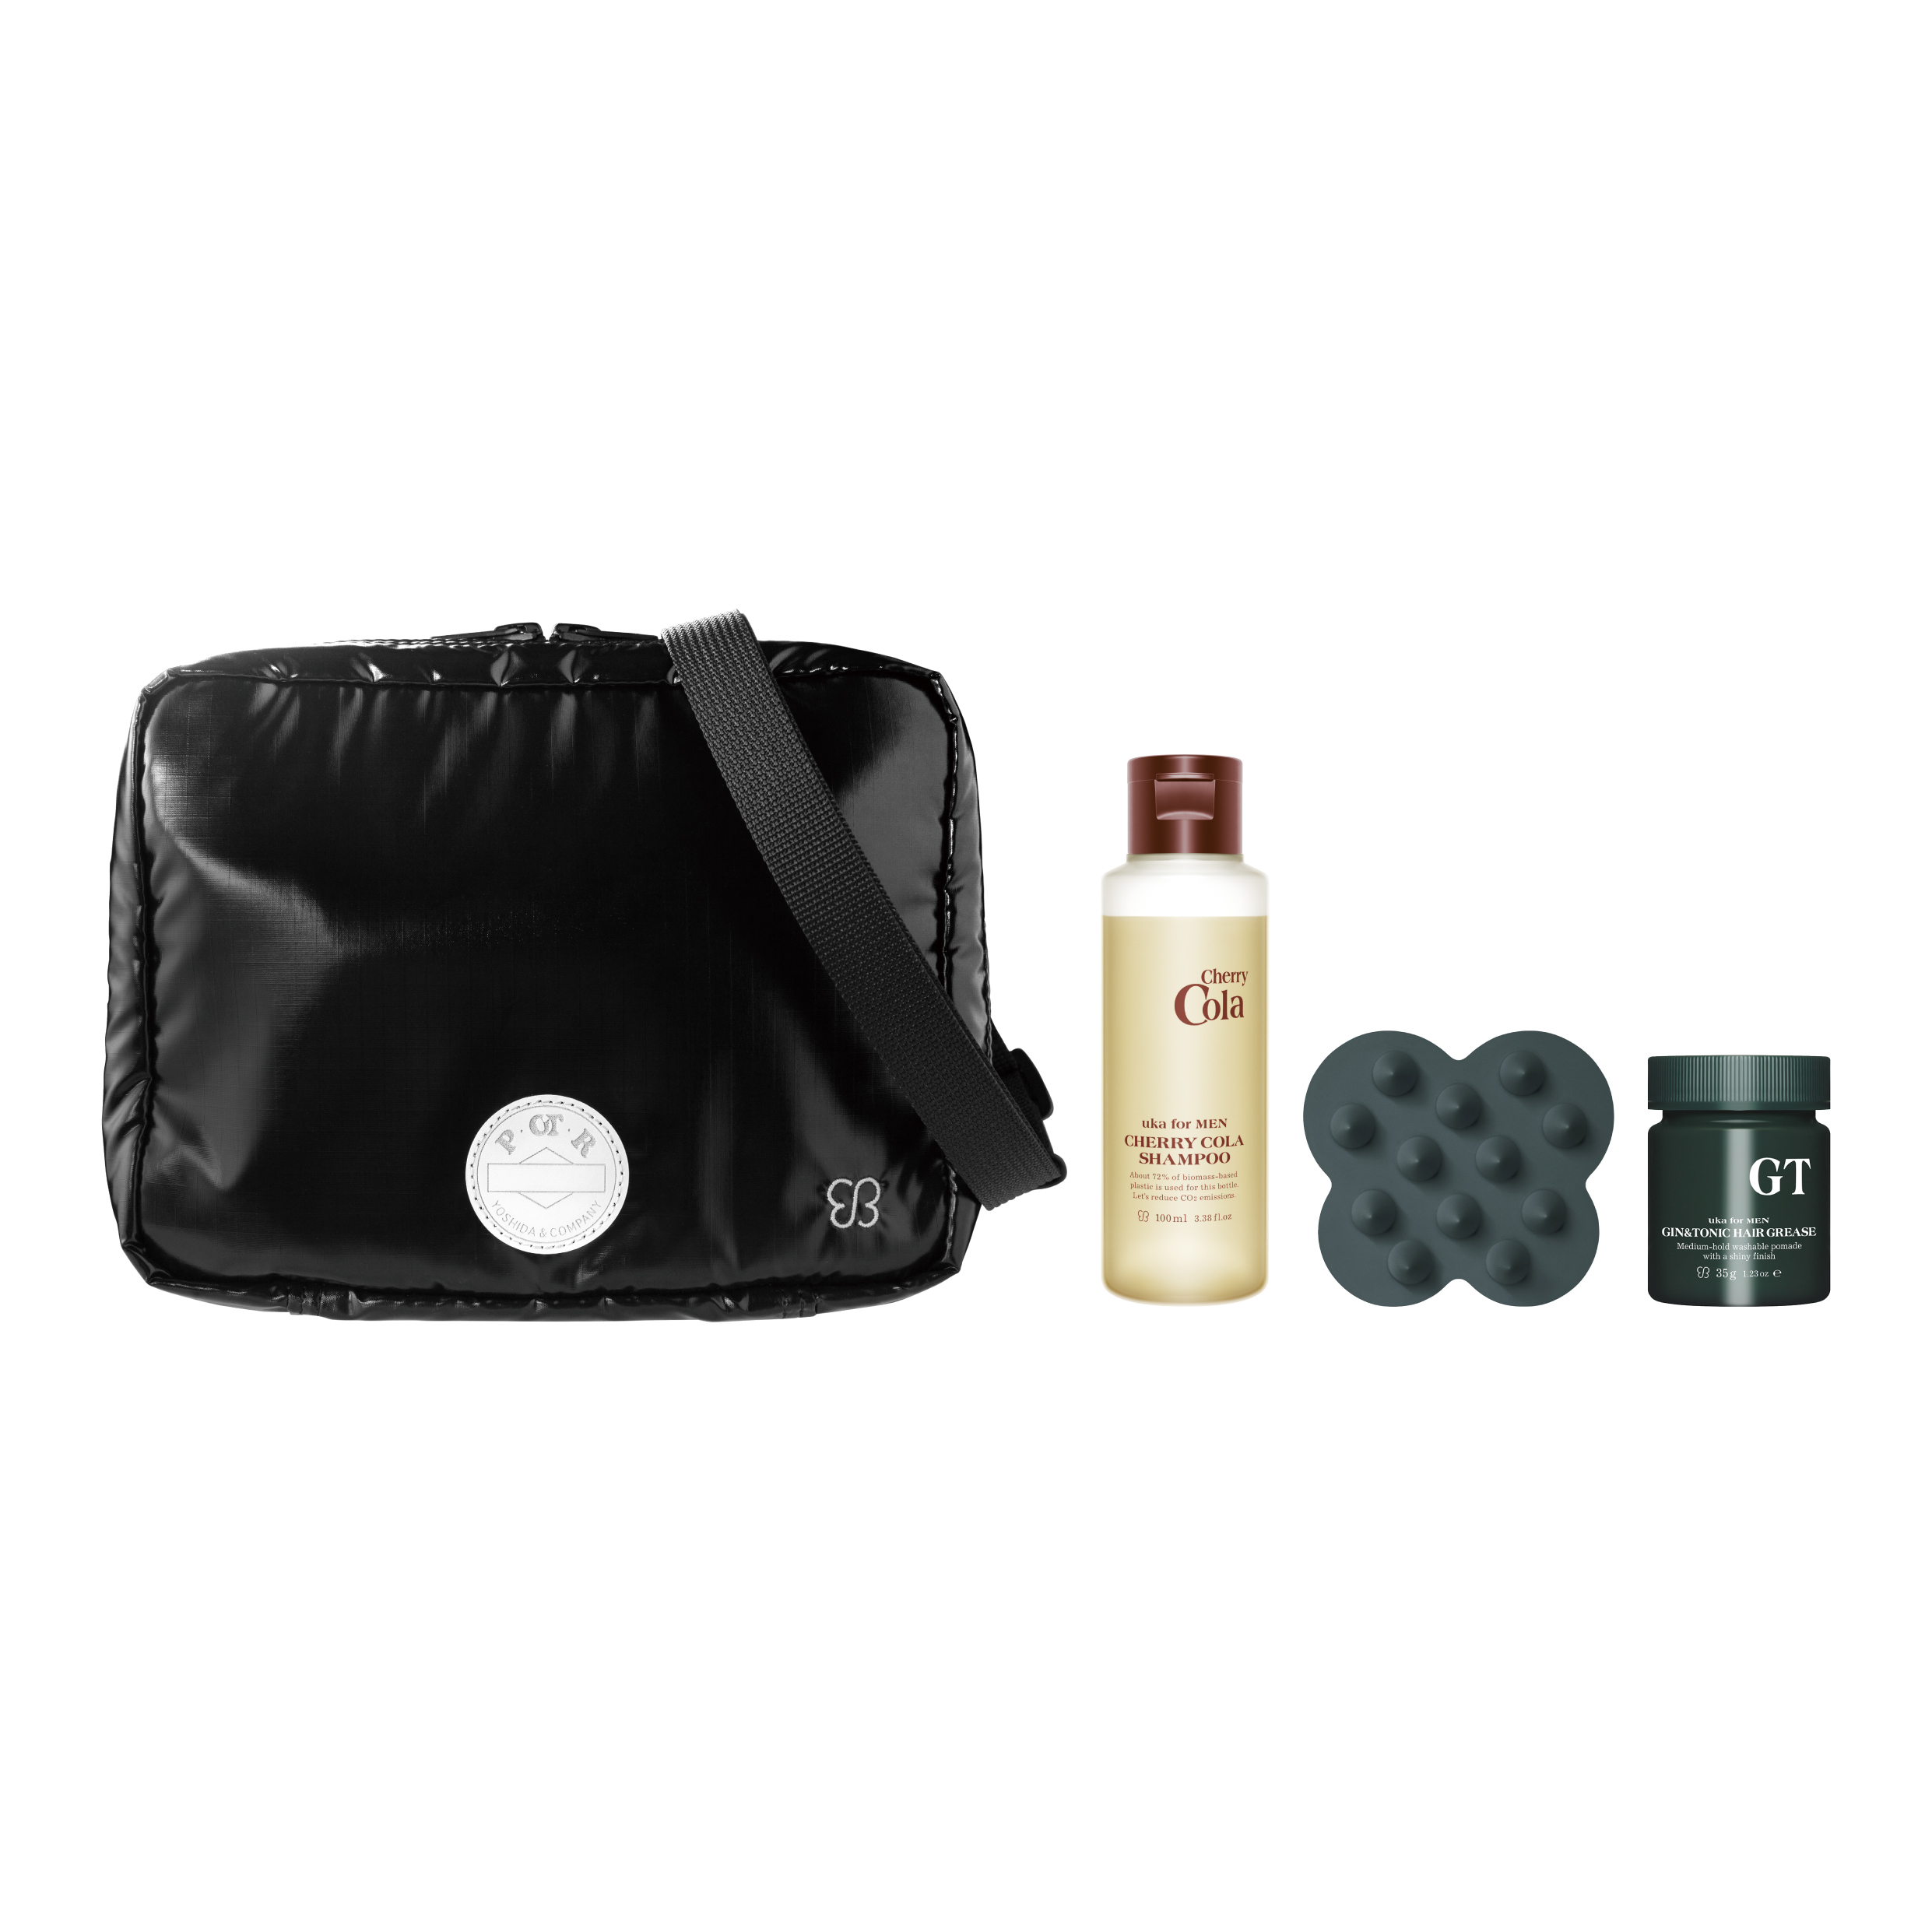 uka for MEN x POTR GROOMING 2WAY POUCH KIT